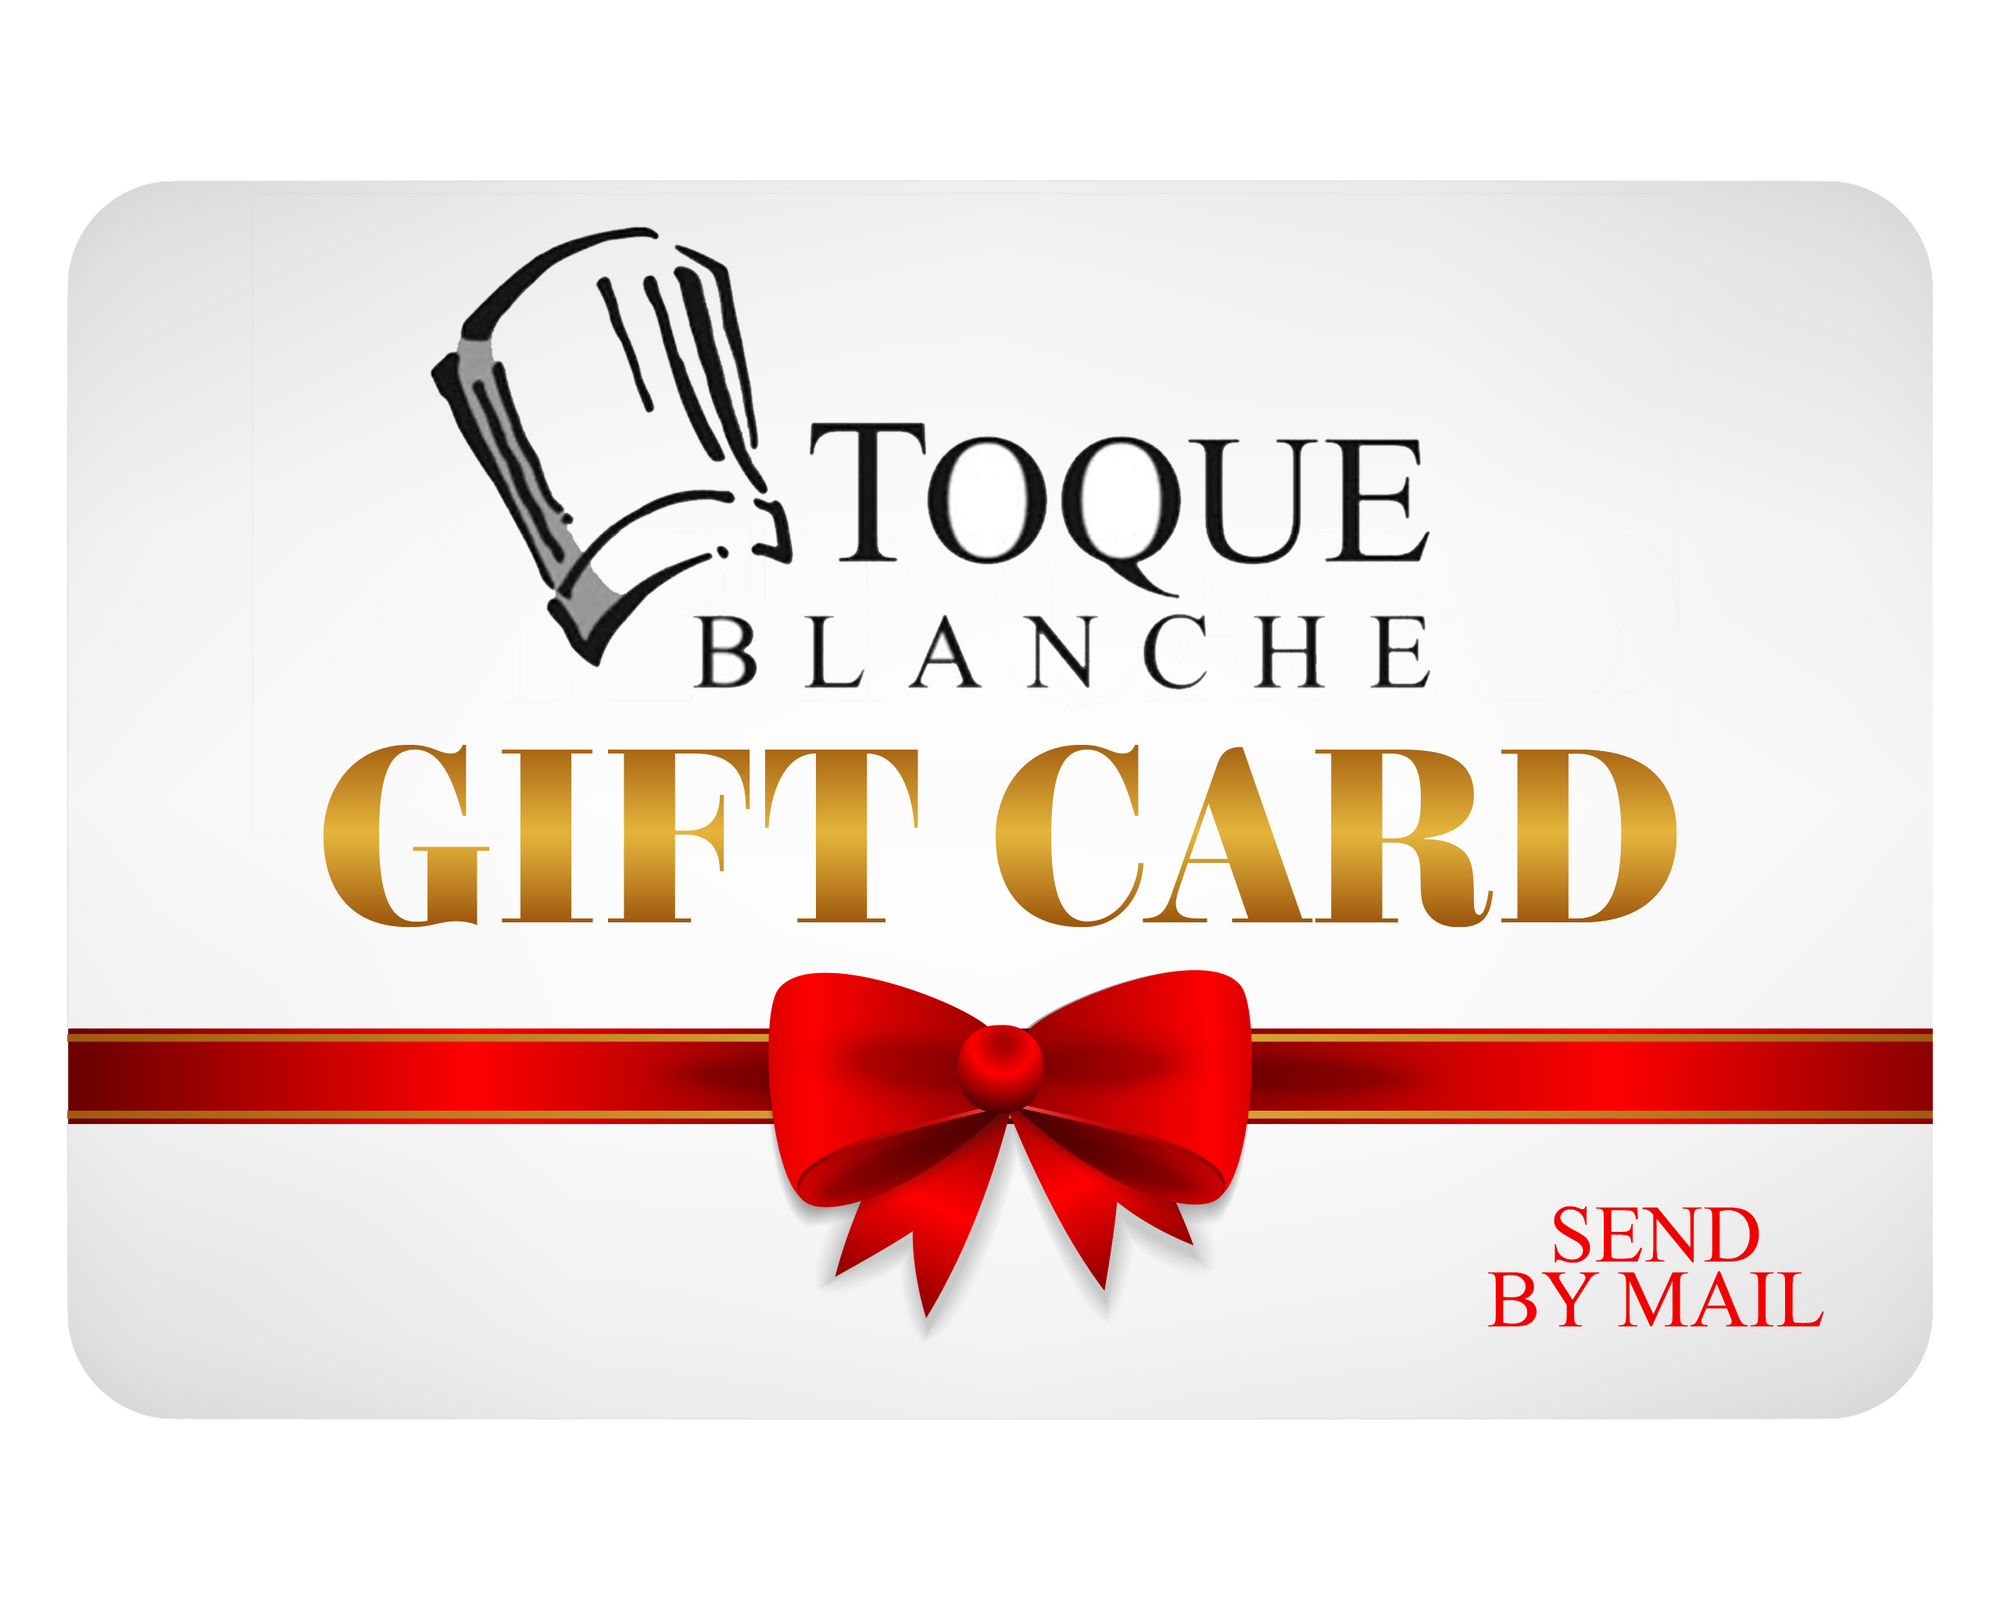 Send by Mail! Toque Blanche Gift Card